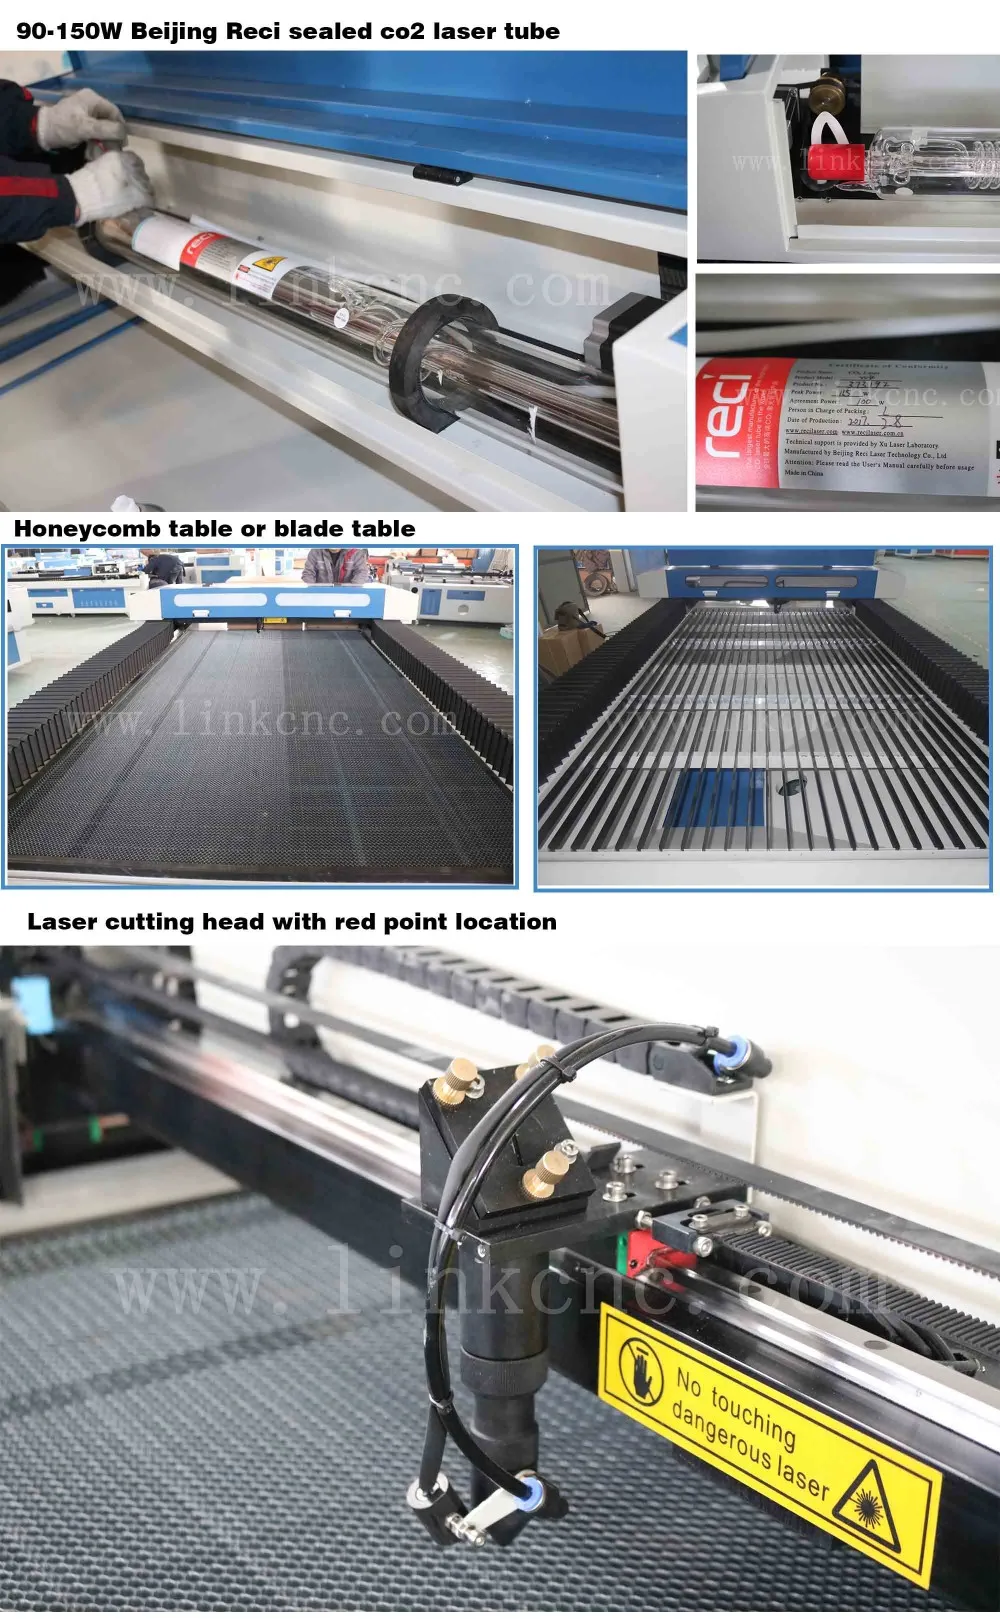 90 Watt Laser Cutting Machine for Wood Acrylic / CO2 Laser Engraving Cutting Machine with Red Dot Point